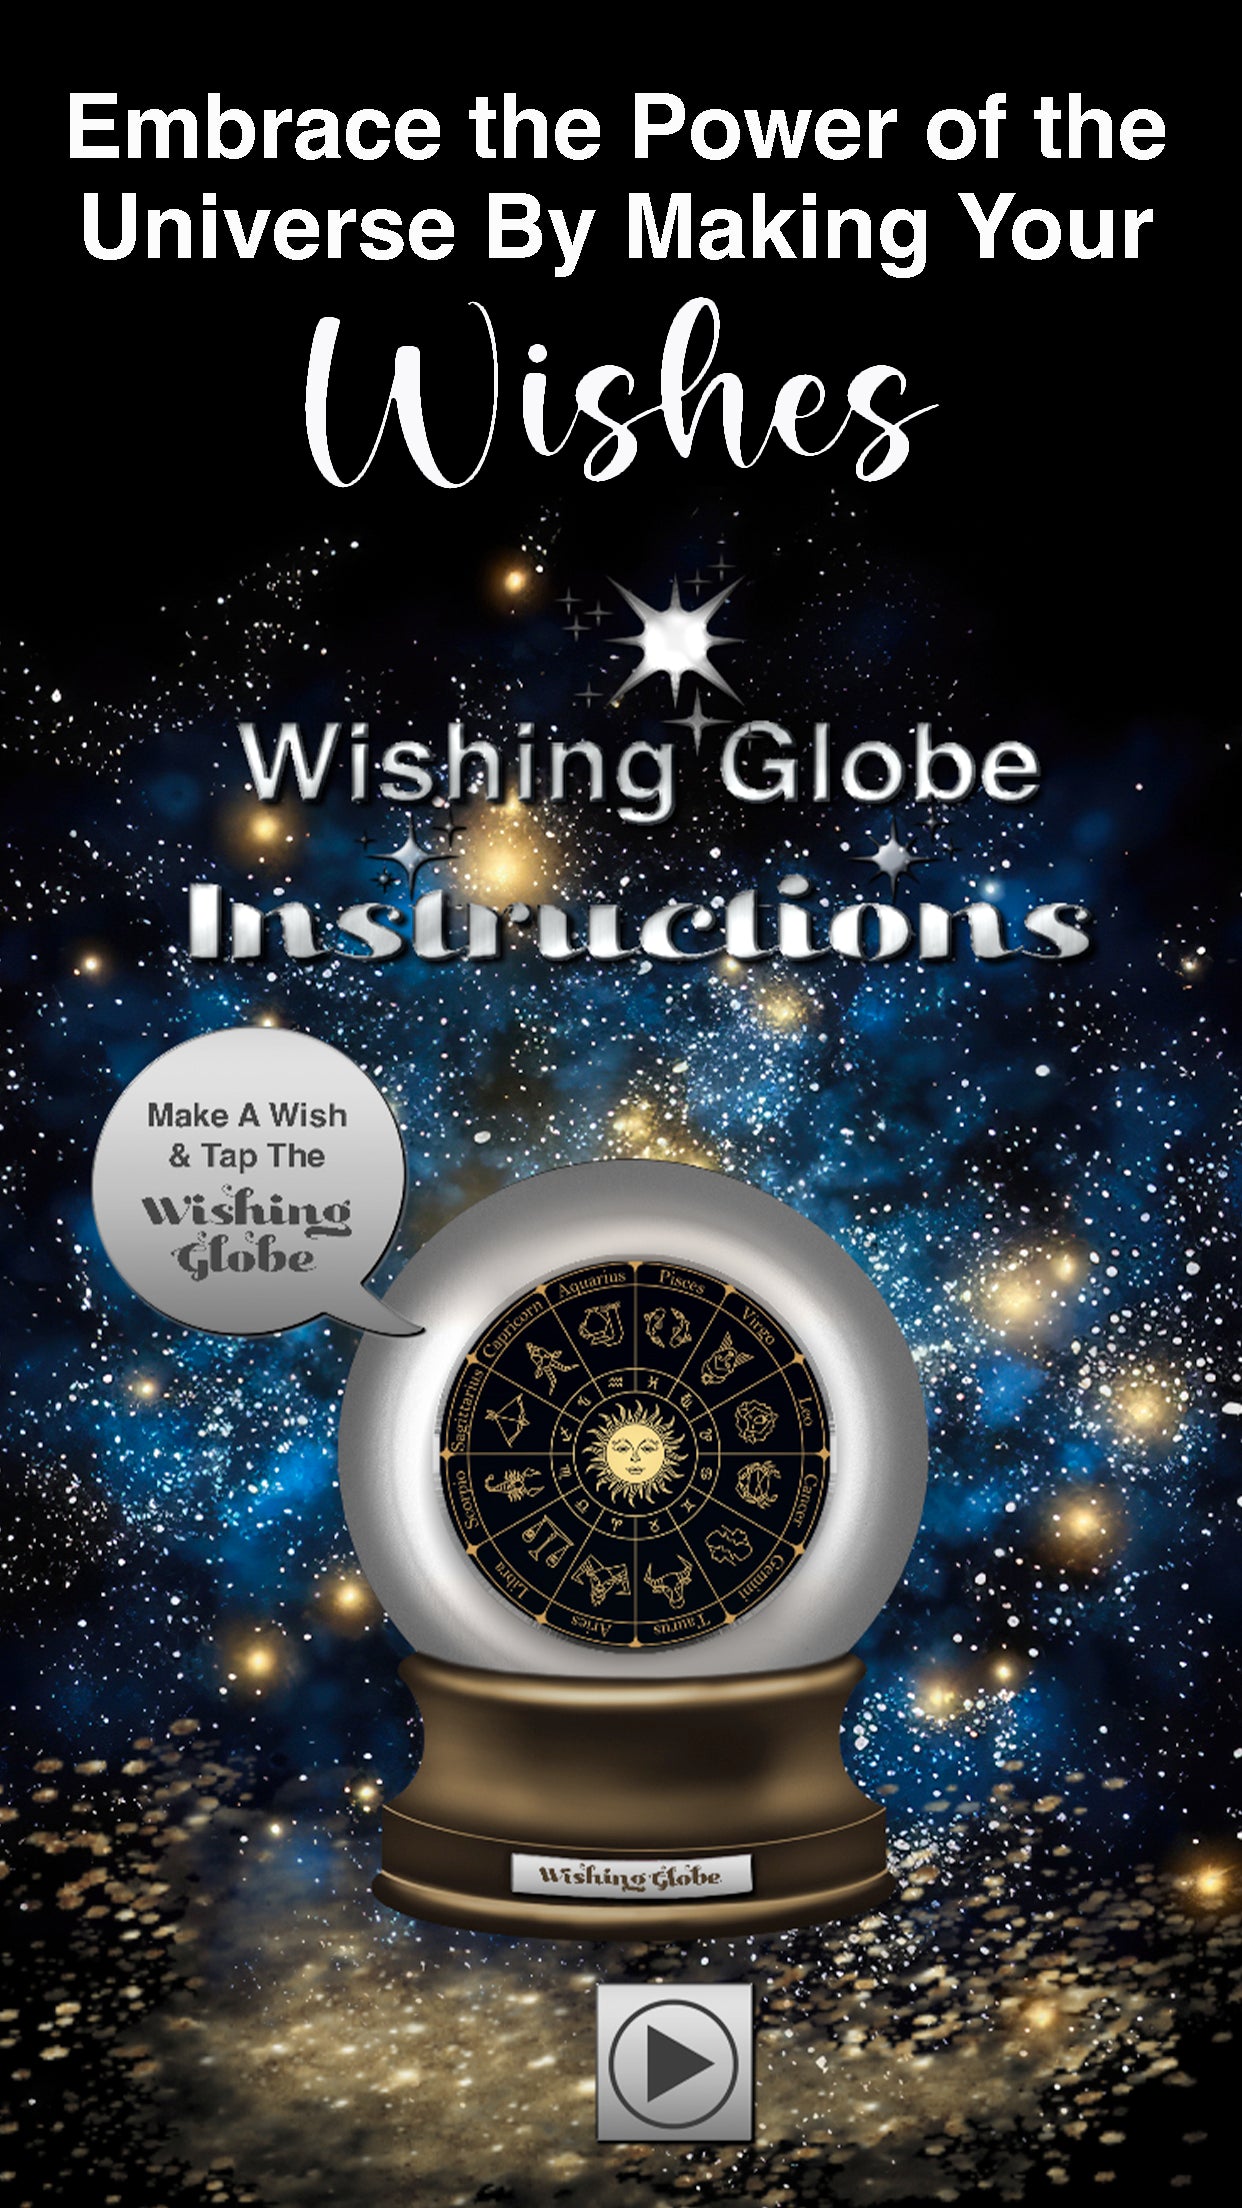 Zodiac Wishing Globe App- Embrace The Possibility! - More Than Charms